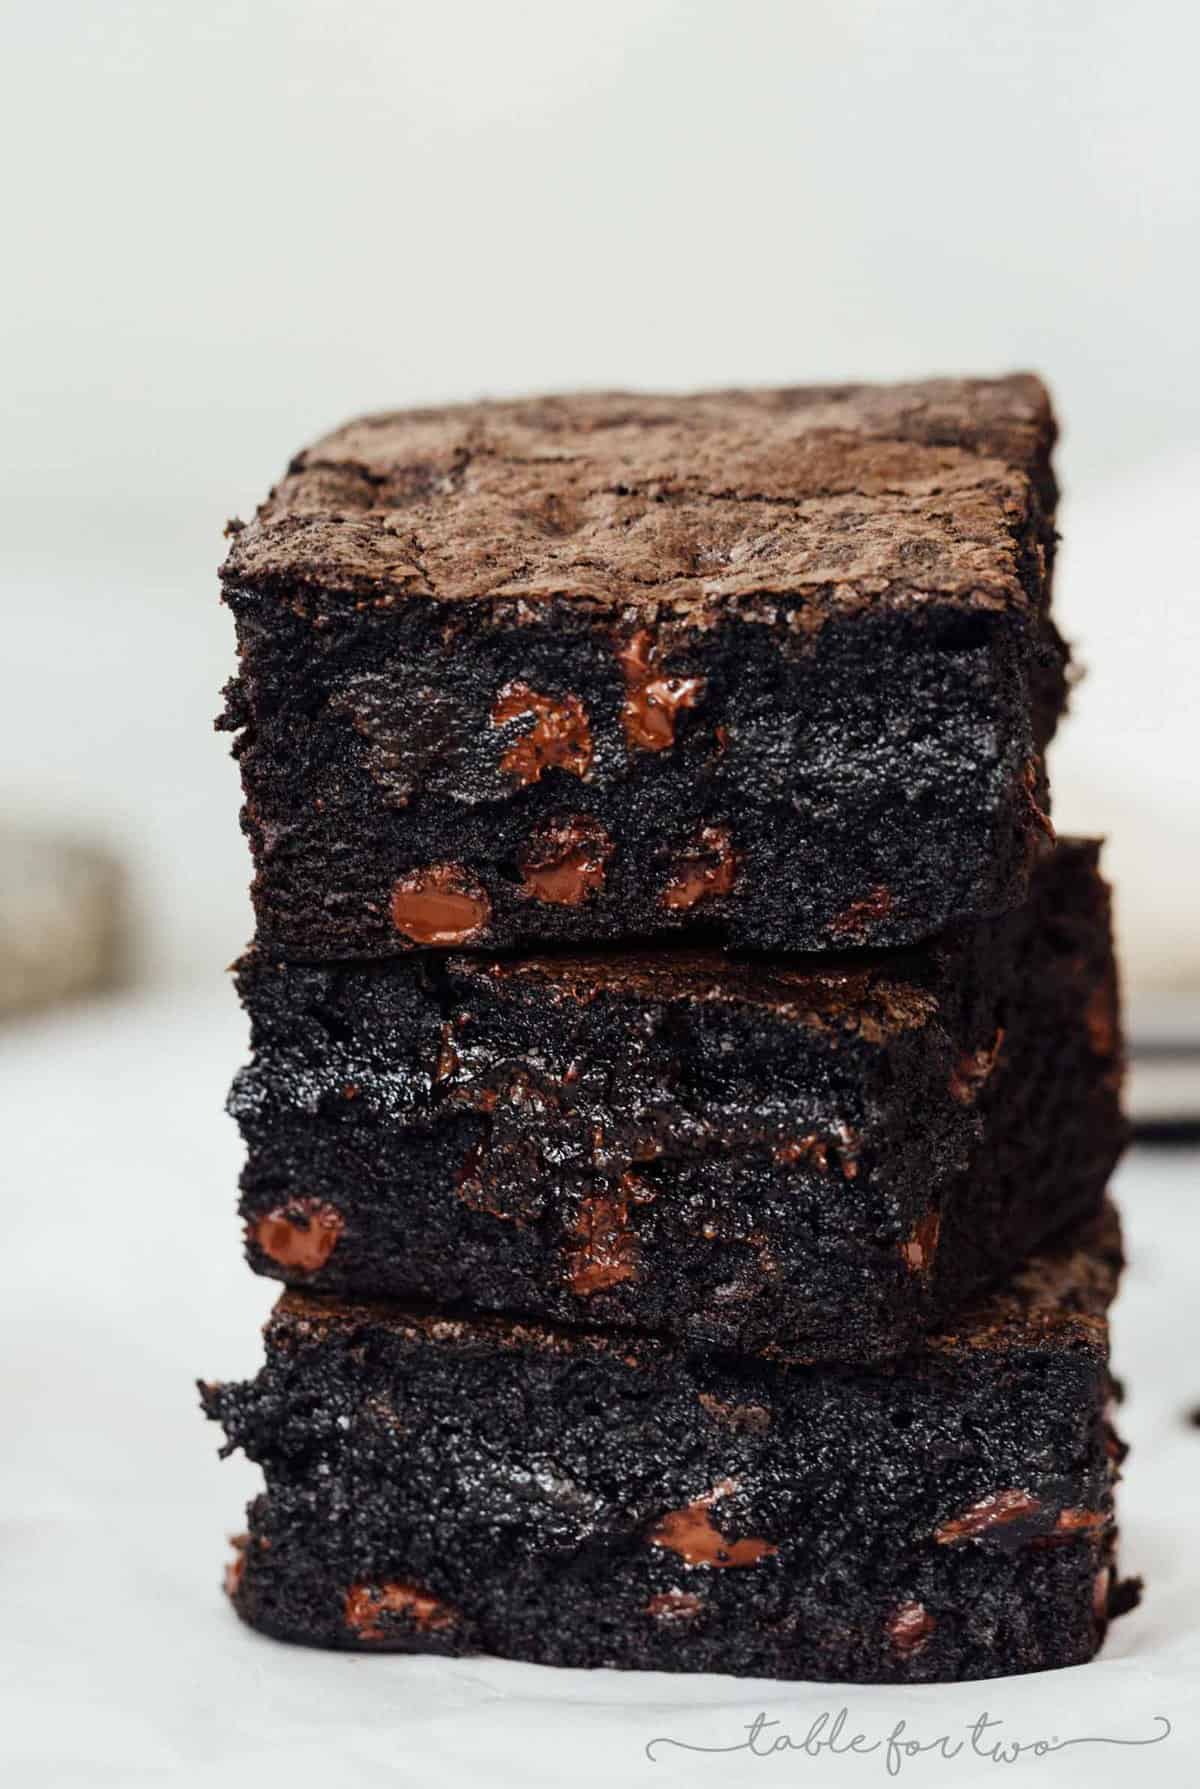 These exceptionally decadent and fudgy dirty chai dark chocolate brownies will elevate your brownie experience. You won't be able to resist just one! The hardest part is waiting for them to bake and then cool!